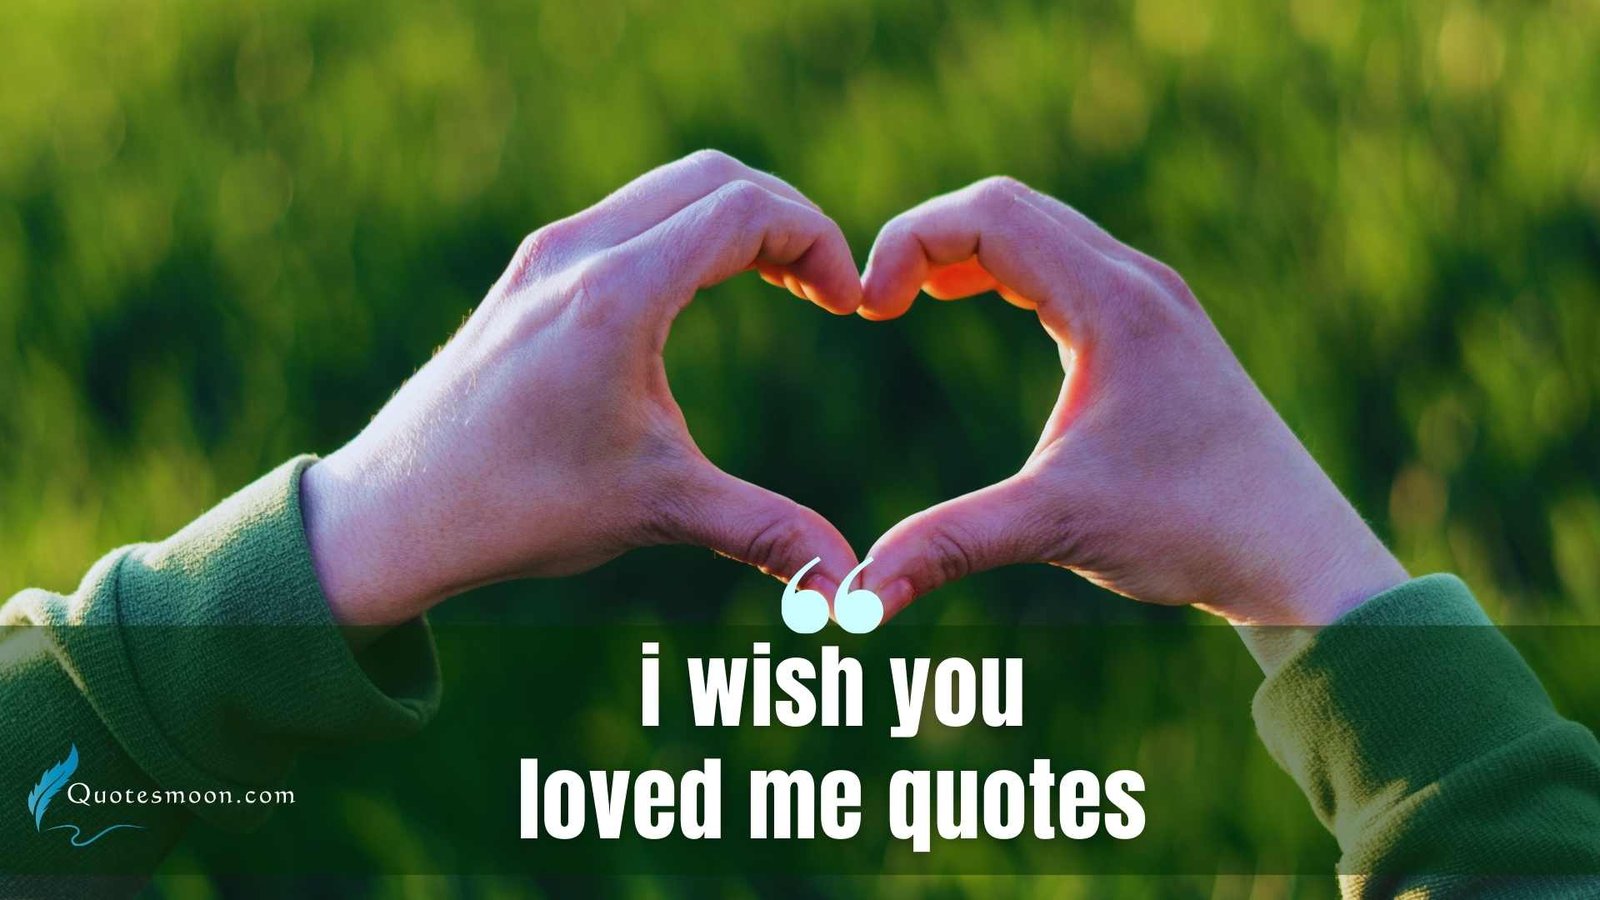 i wish you loved me quotes quotesmoon images